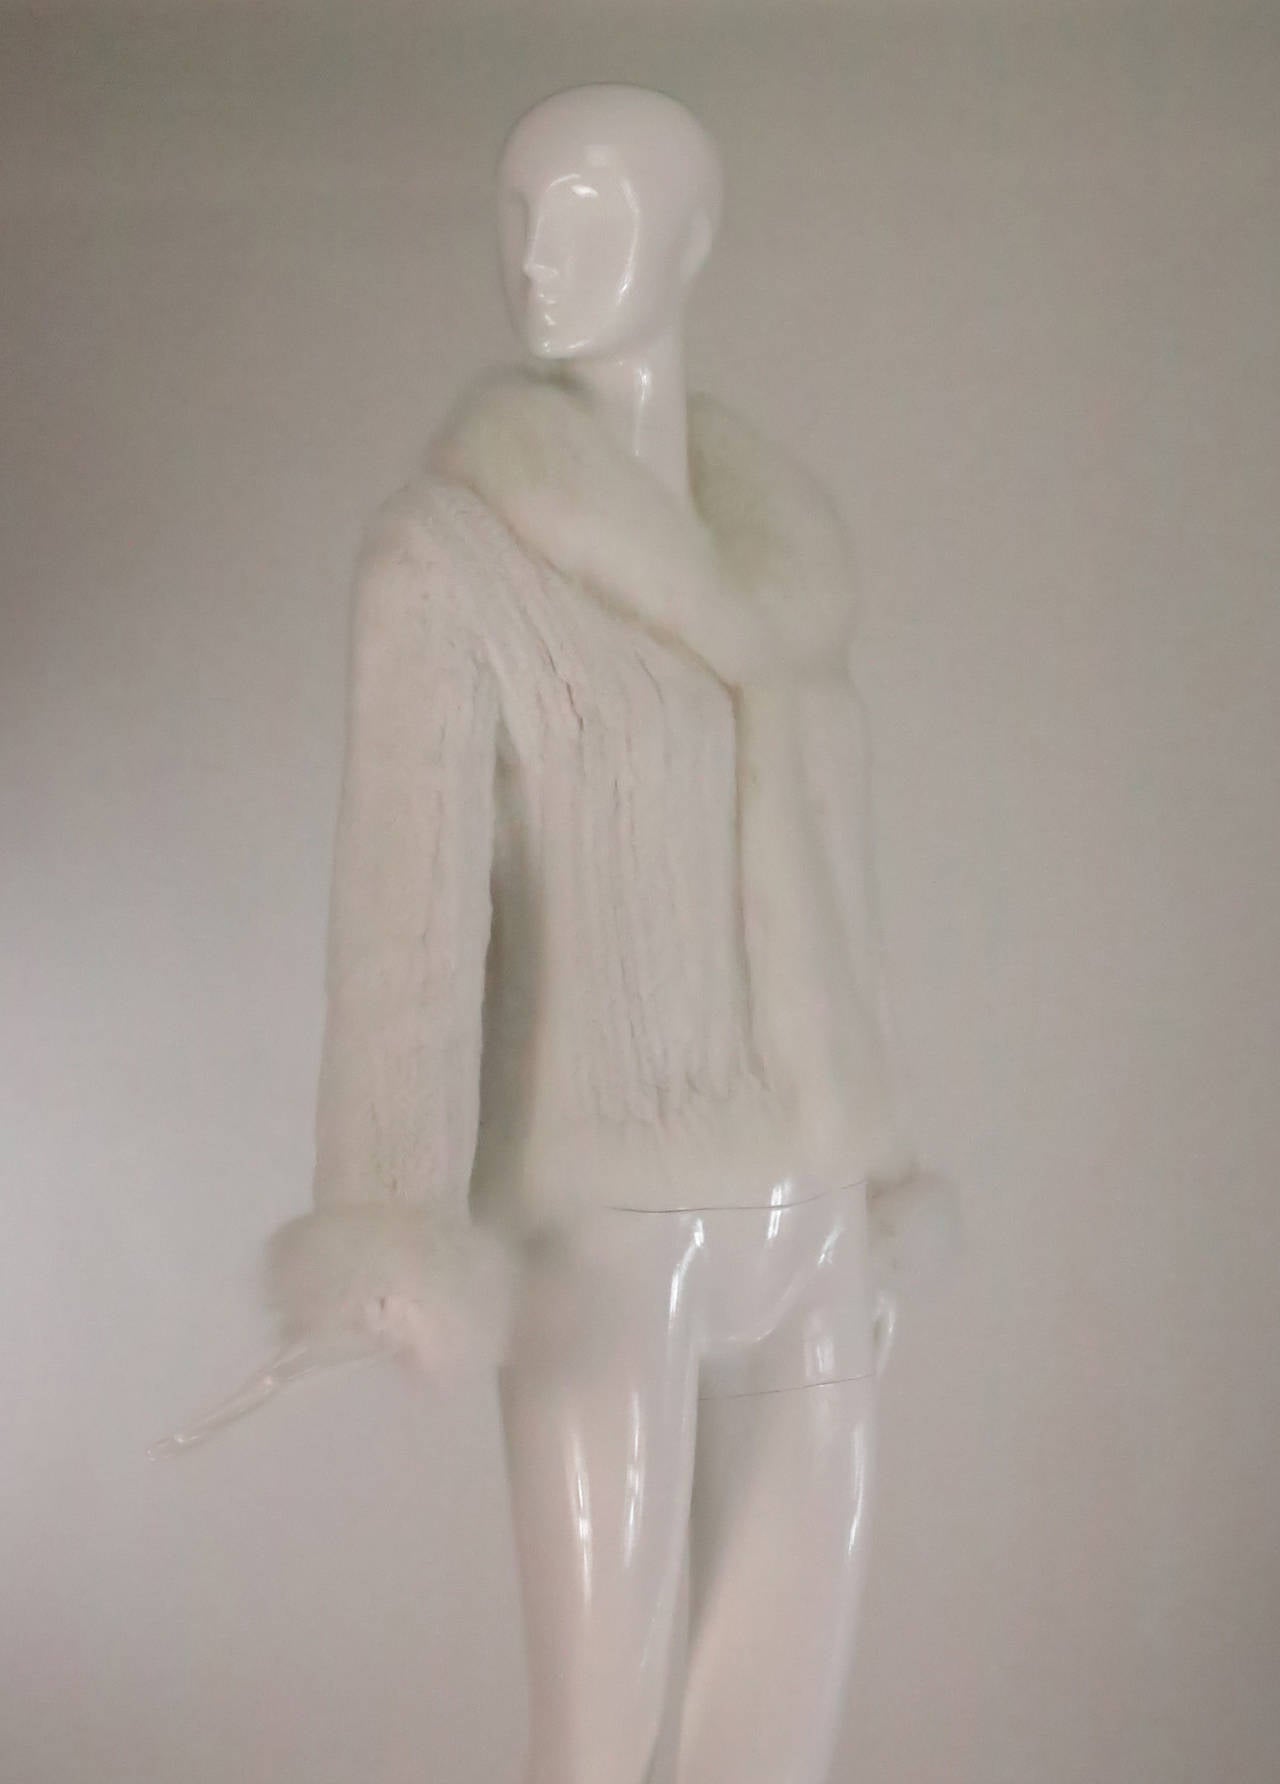 Snow white knitted rabbit fur jacket with fox fur collar & cuffs made in France...Unlined closes at the front with a fur hook & eye...Fits like a small...Perfect for a winter wedding!

In excellent wearable condition... All our clothing is dry